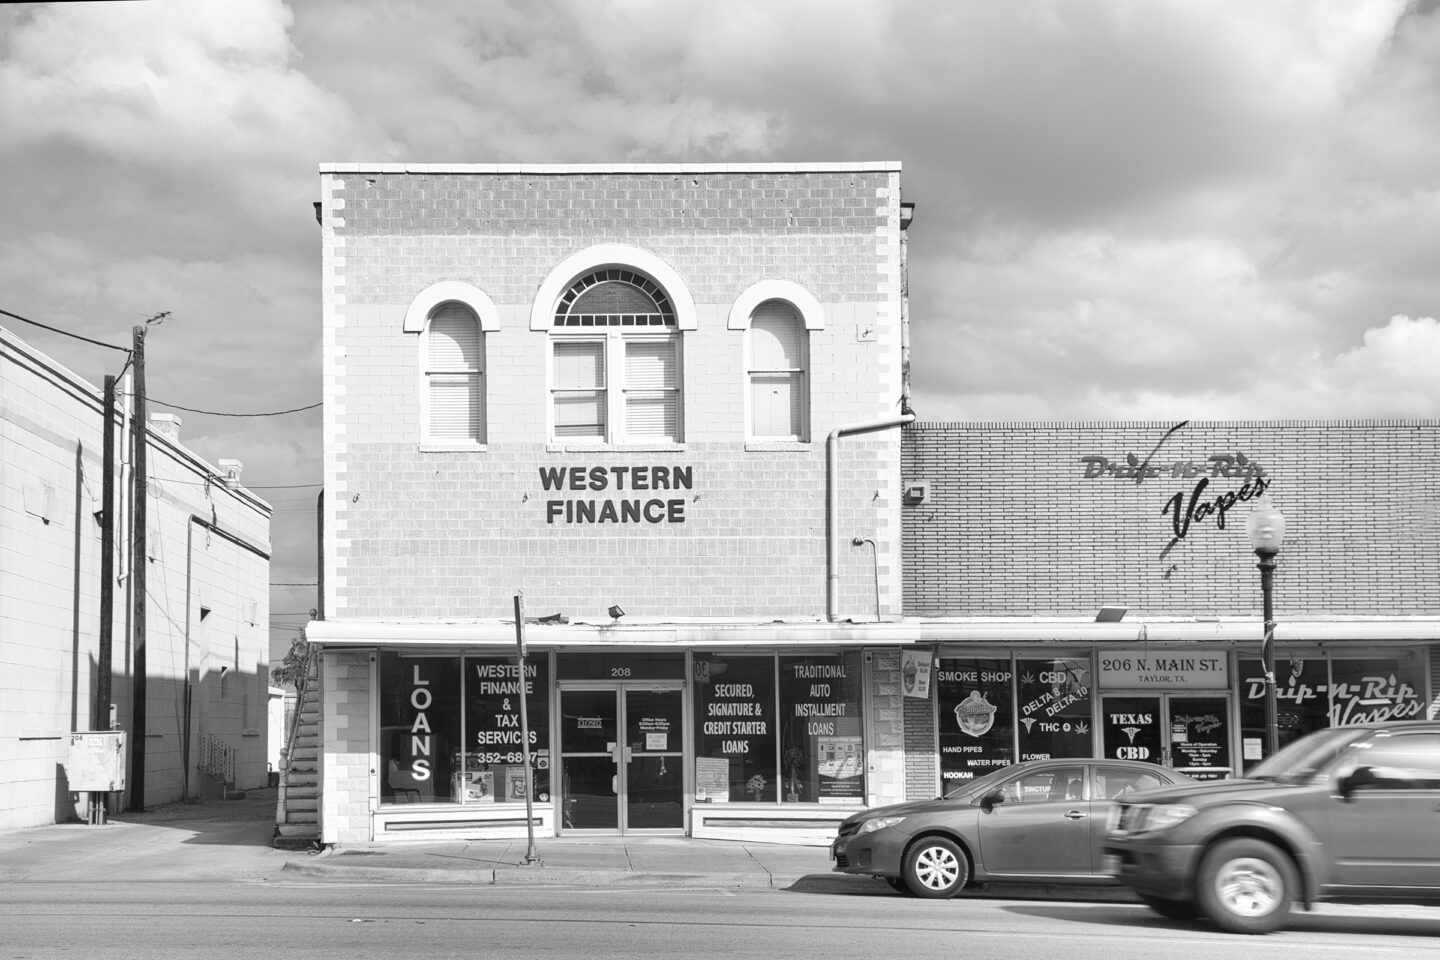 Monochrome image of rural Taylor, Texas town featuring Western Finance business with cars going past, by Carol Schiraldi 